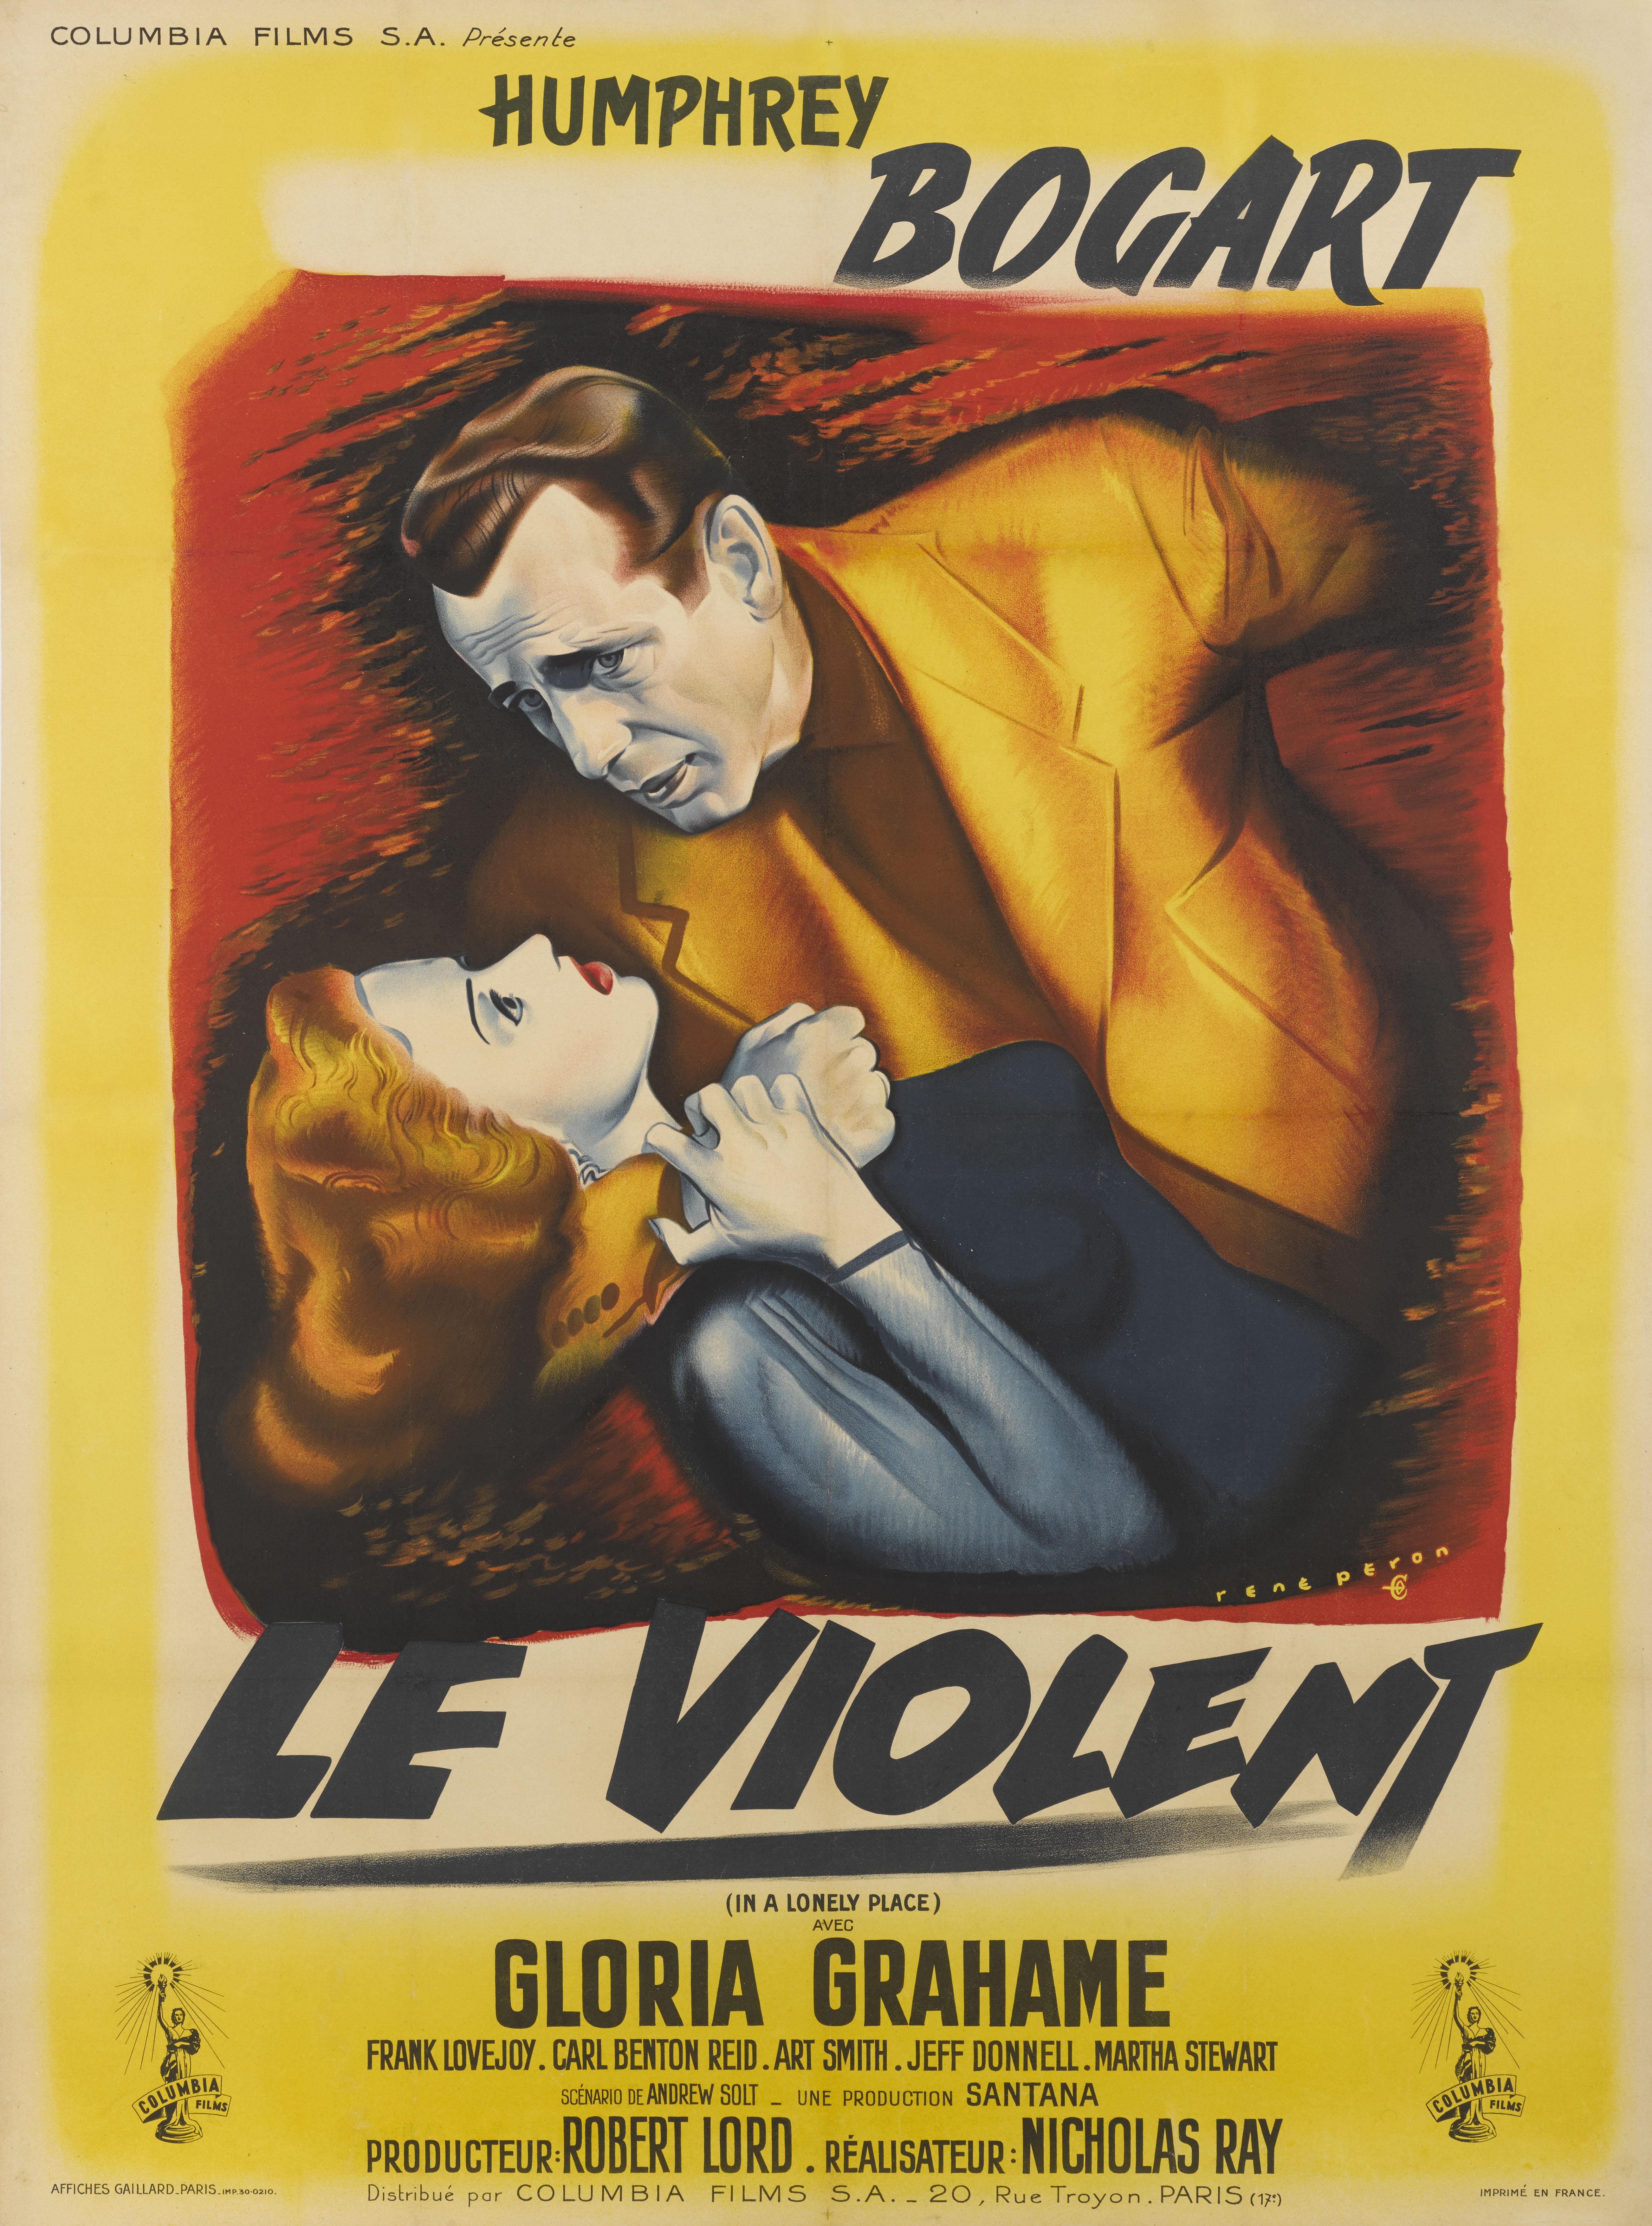 Original French film poster for the 1950 Film Noir directed by Nicholas Ray and starring Humphrey Bogart, Gloria Grahame.
The art work on this poster is by the great French poster artist Rene Peron (1904-1972) and was used on this poster for the